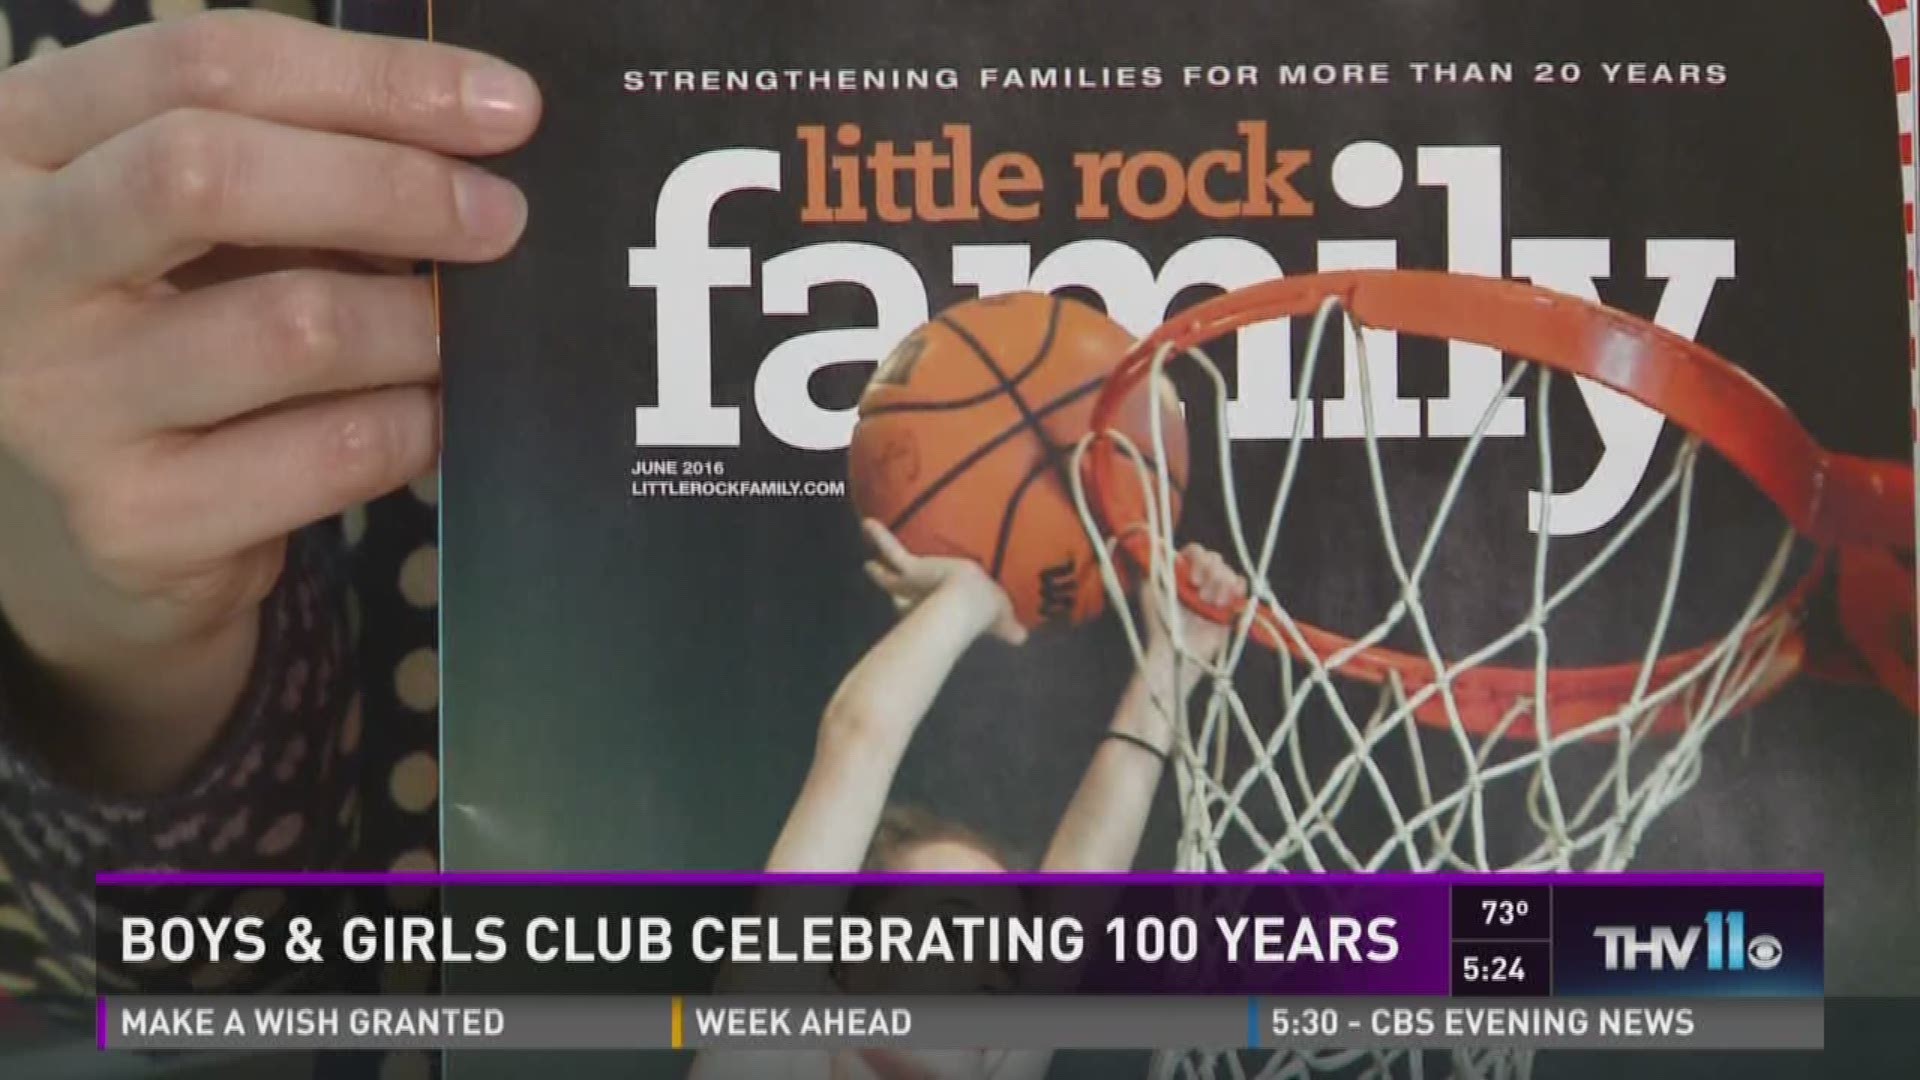 Craig O'Neill interviews the ladies of Little Rock Family and the Boys and Girls Club